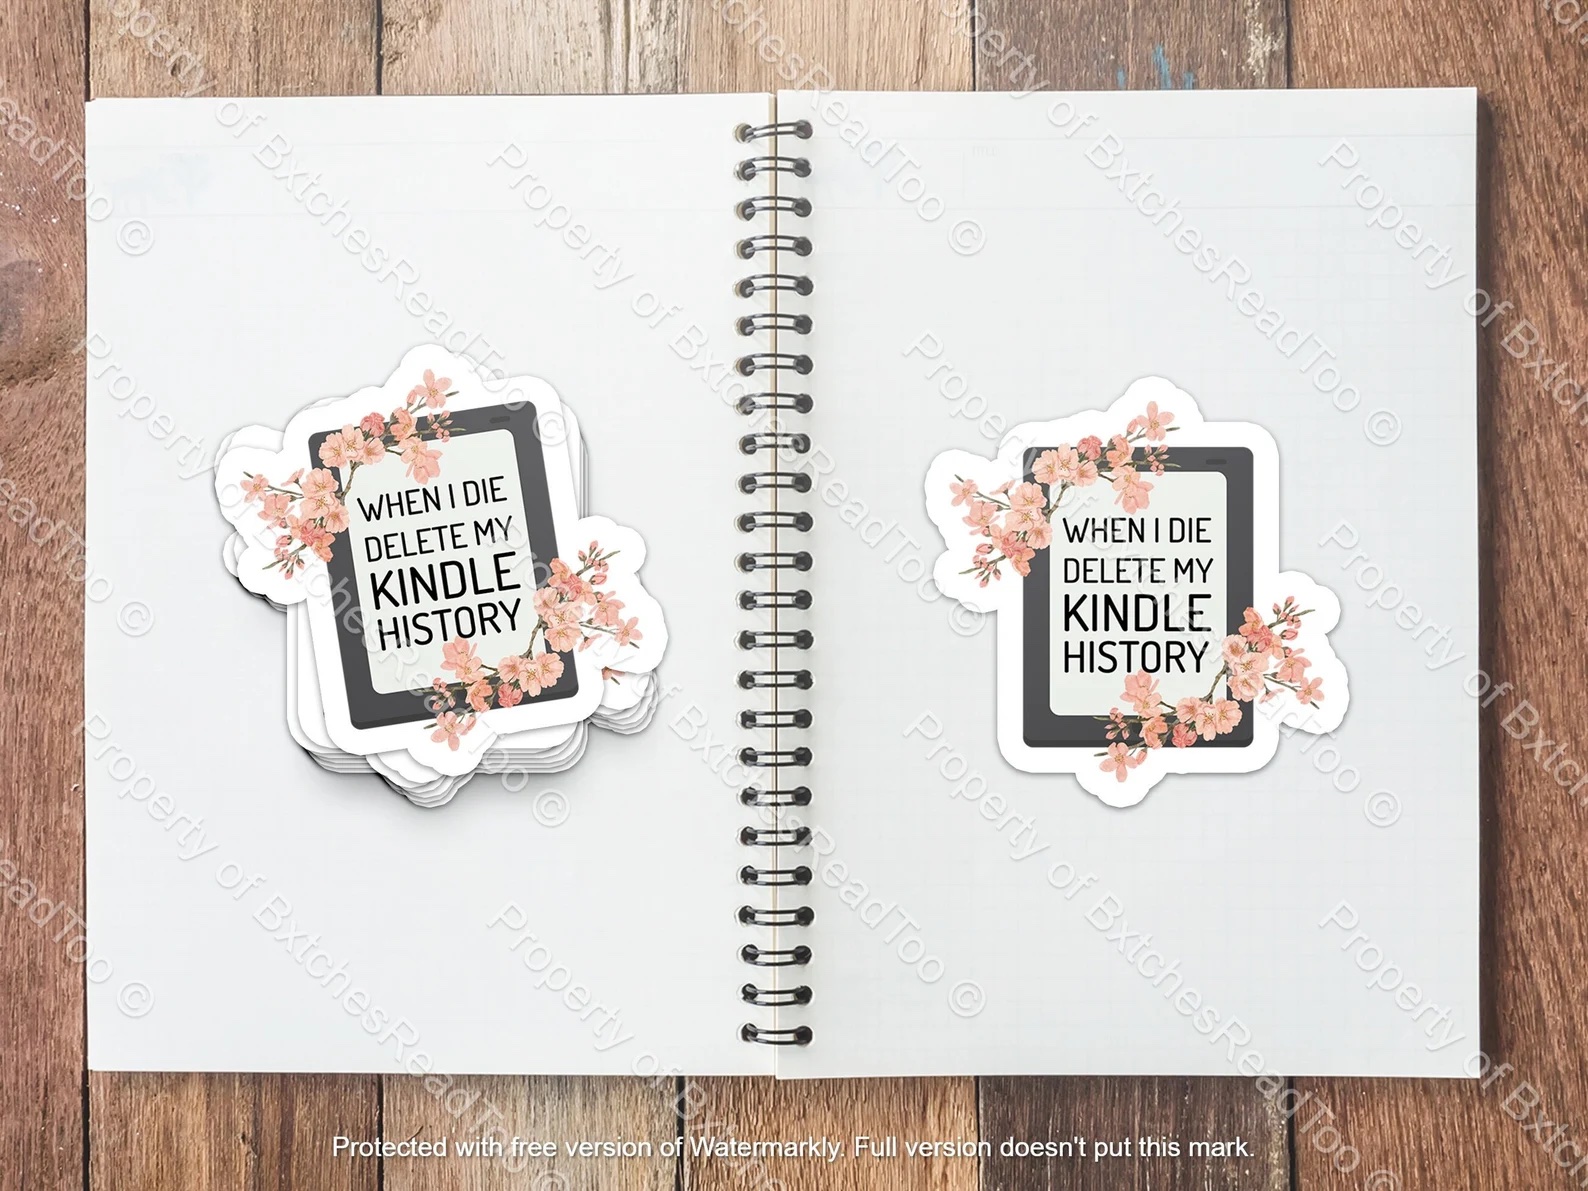 a photo of a sticker of a kindle surrounded by flowers. The text on the sticker reads: "When I Die, Delete My Kindle History"